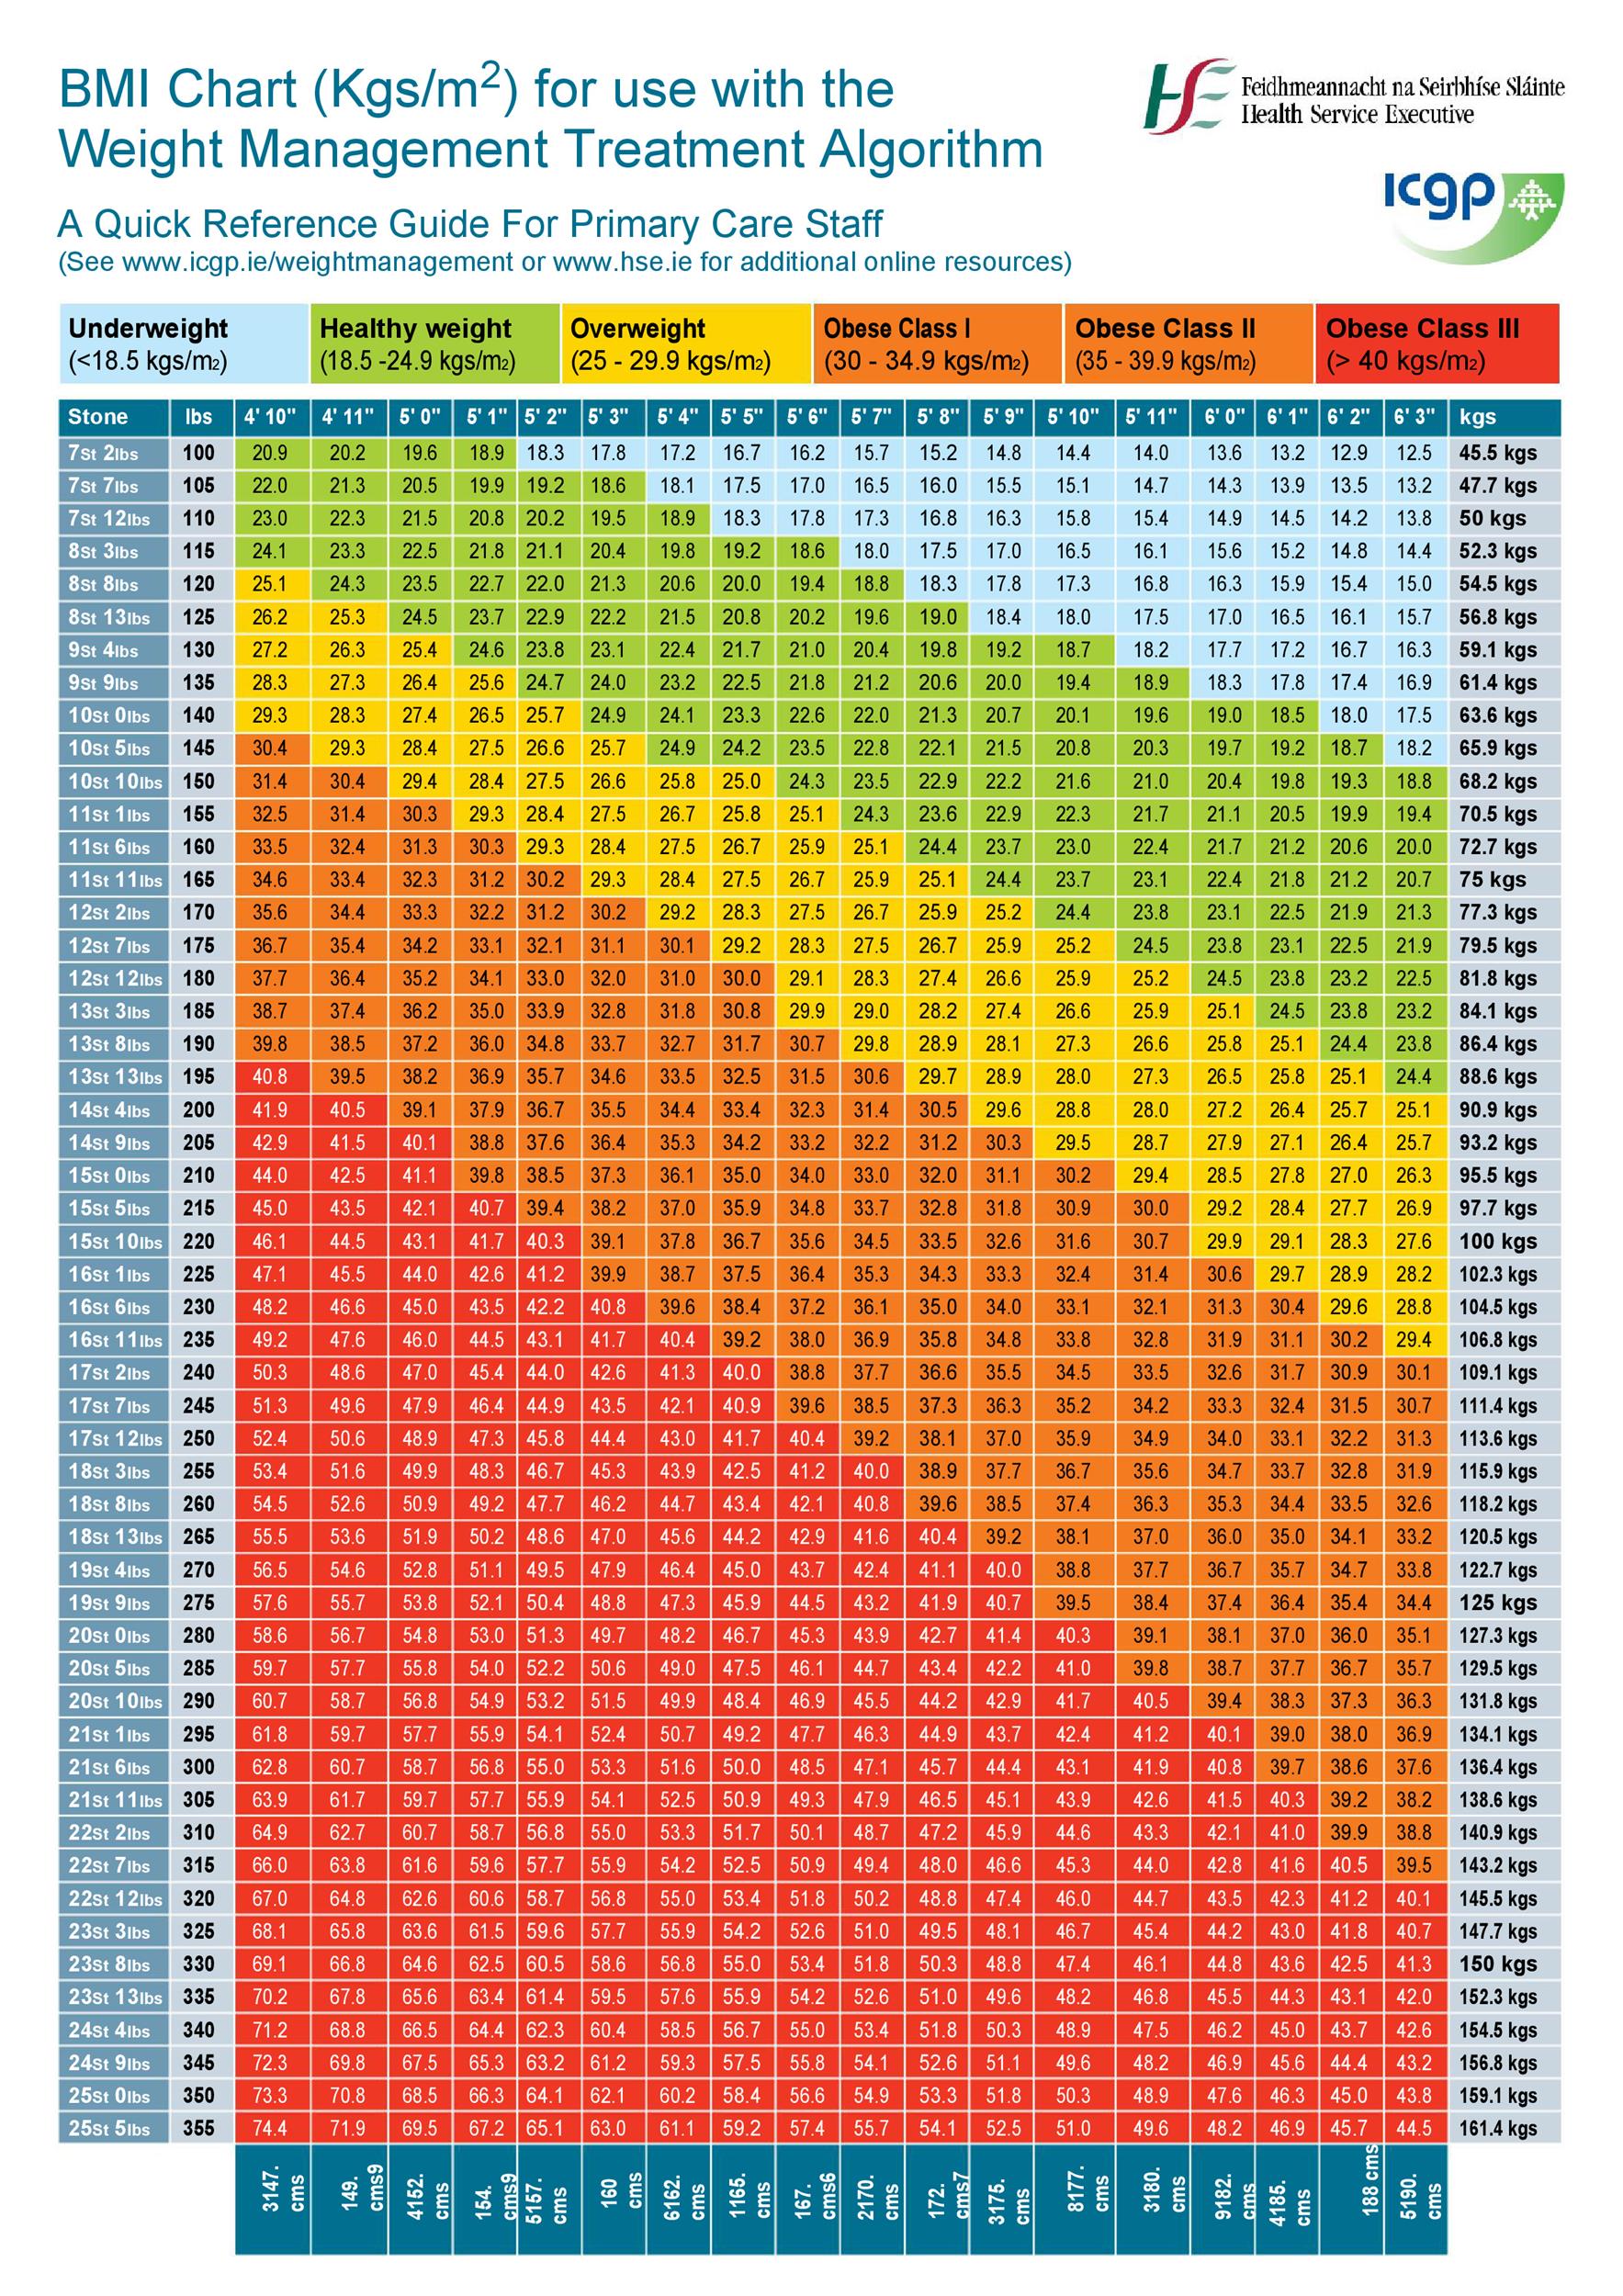 Age And Weight Chart For In Kg